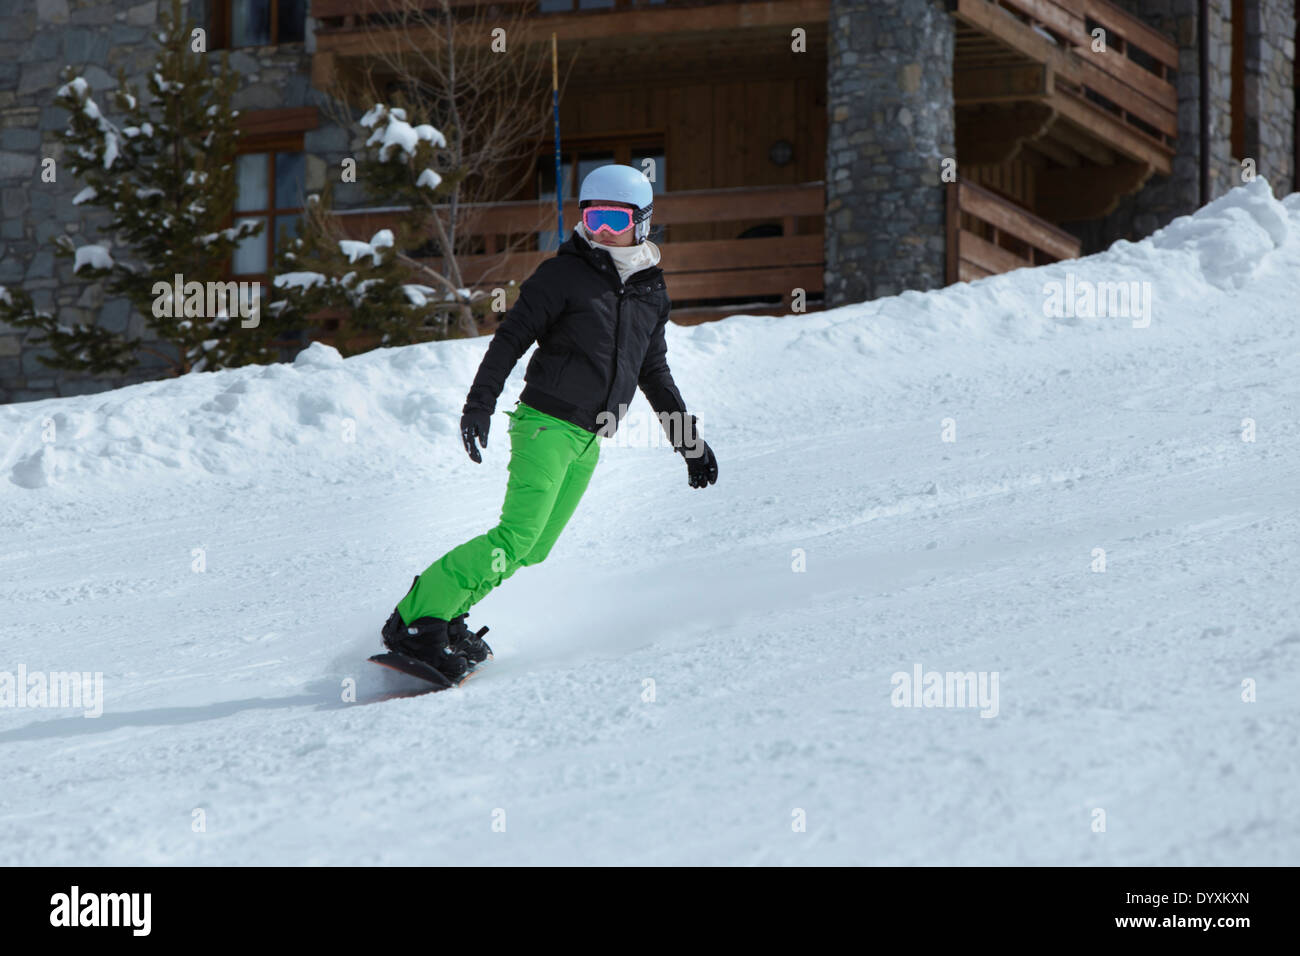 Snowboarder with bright green trousers, helmet and pink goggles, traversing the piste. Stock Photo